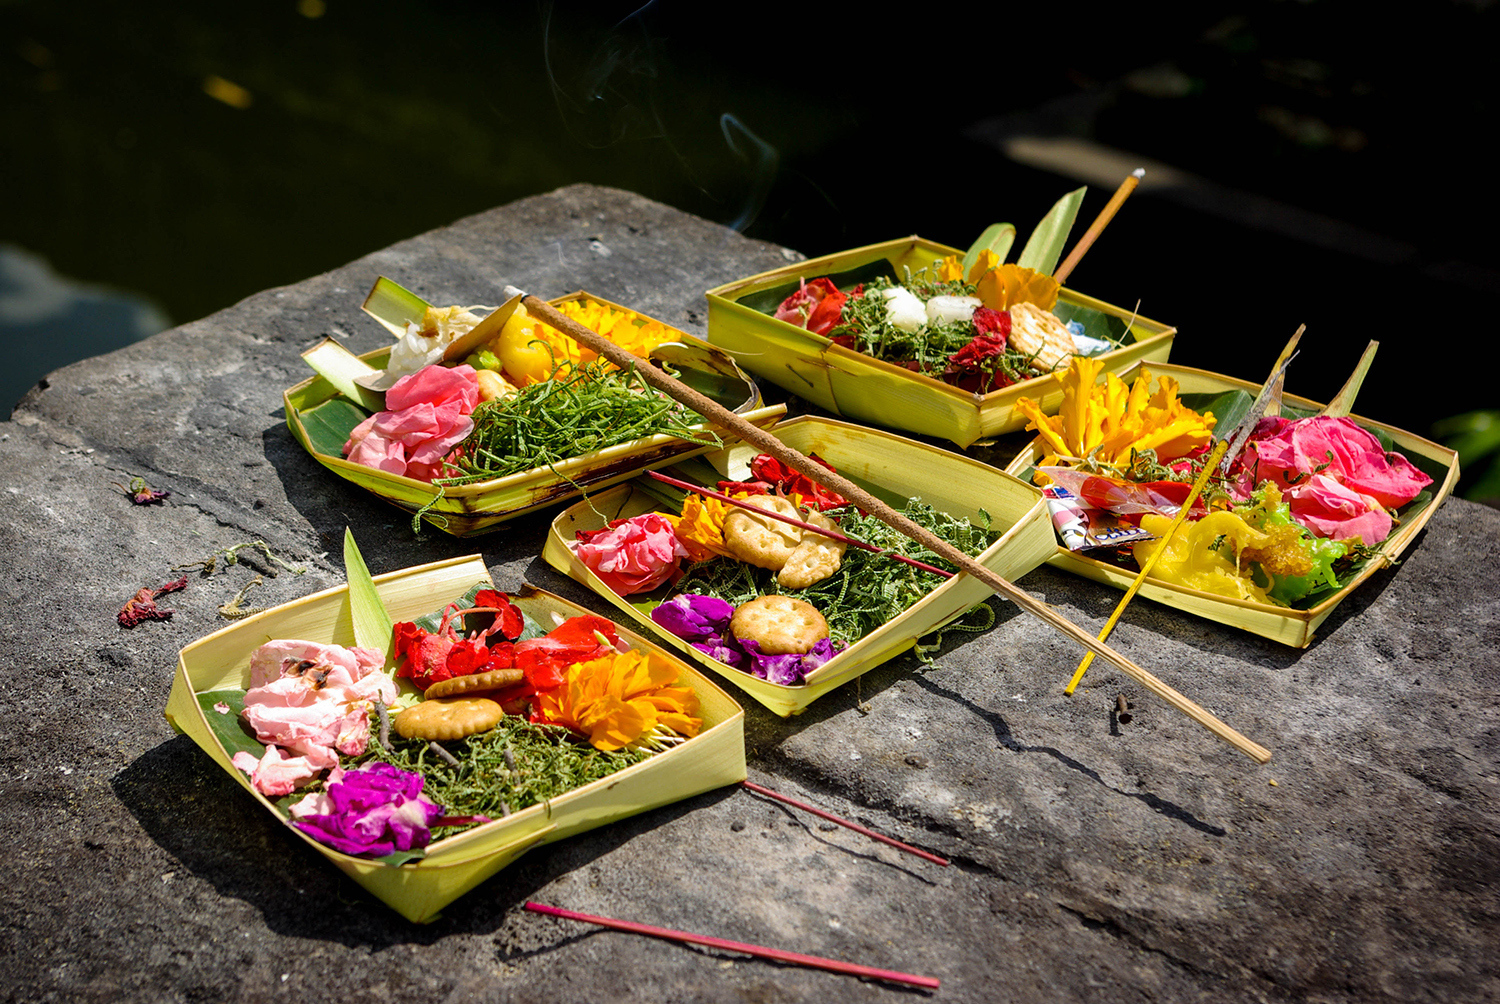 <p>Balinese Hindus create these colourful <em>canang sari</em> baskets from palm leaves. They are left at temples, in front of homes, and in many other places as daily offerings.</p>